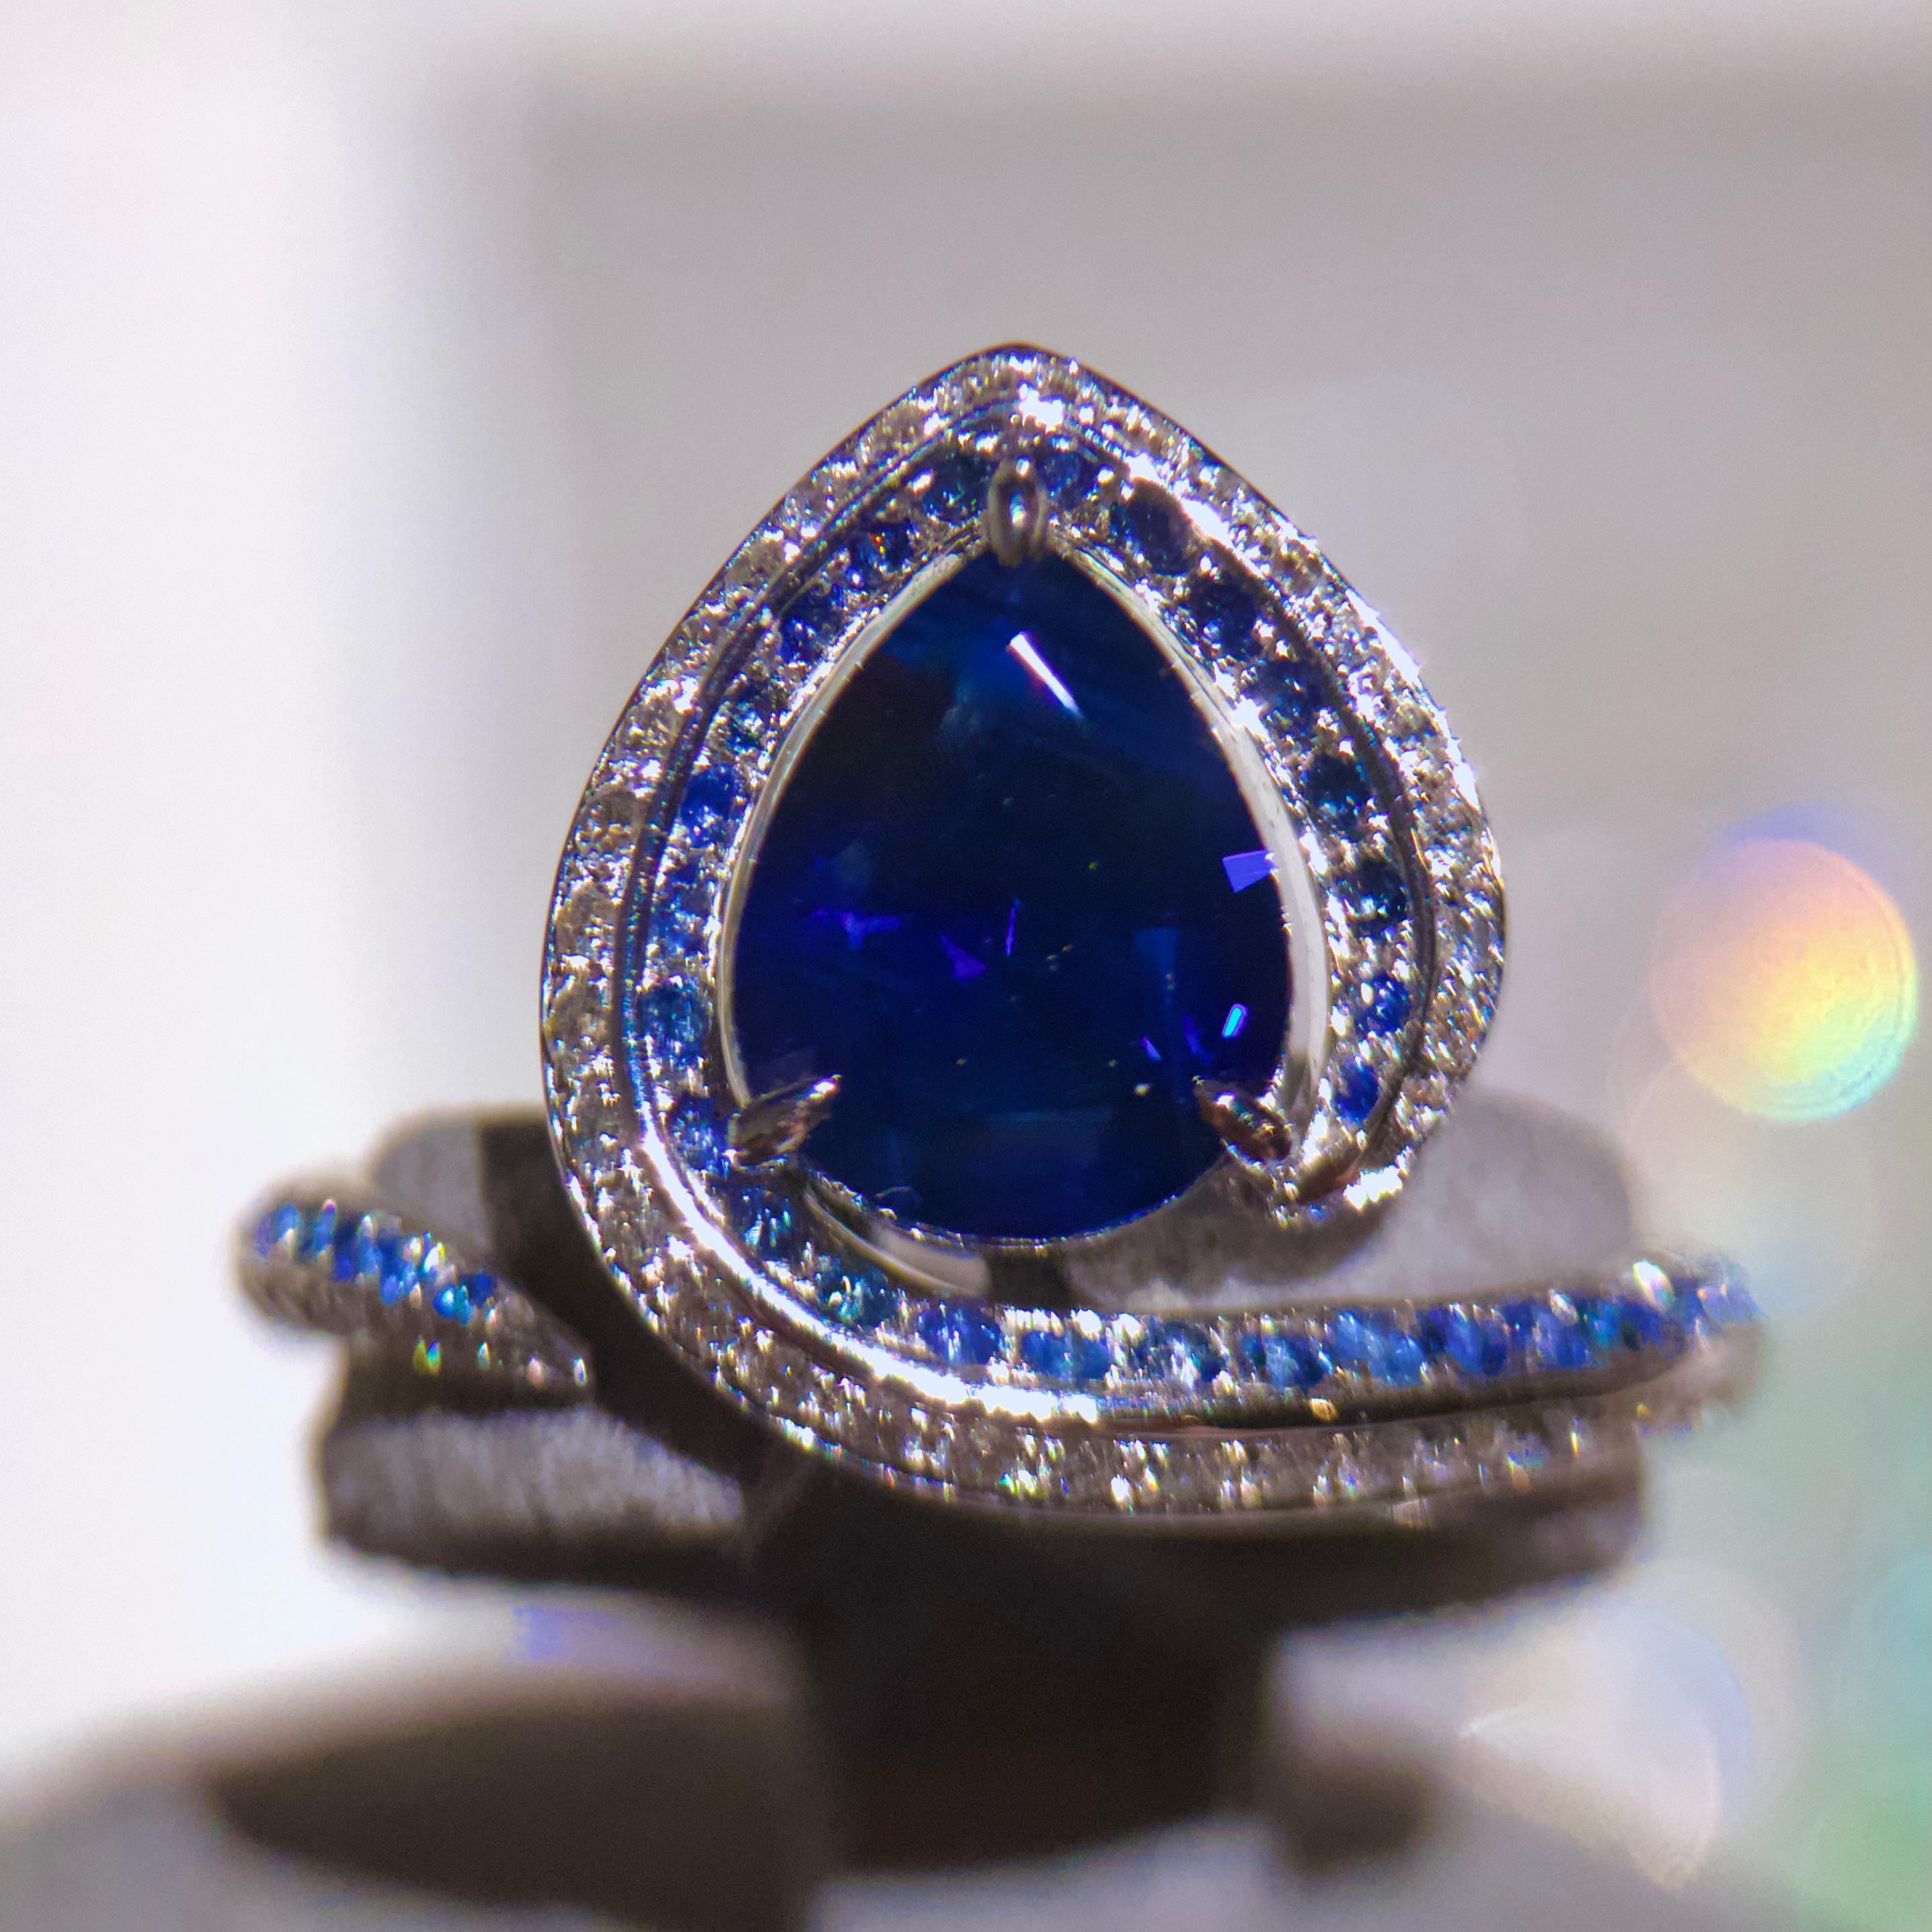 what does a sapphire represent